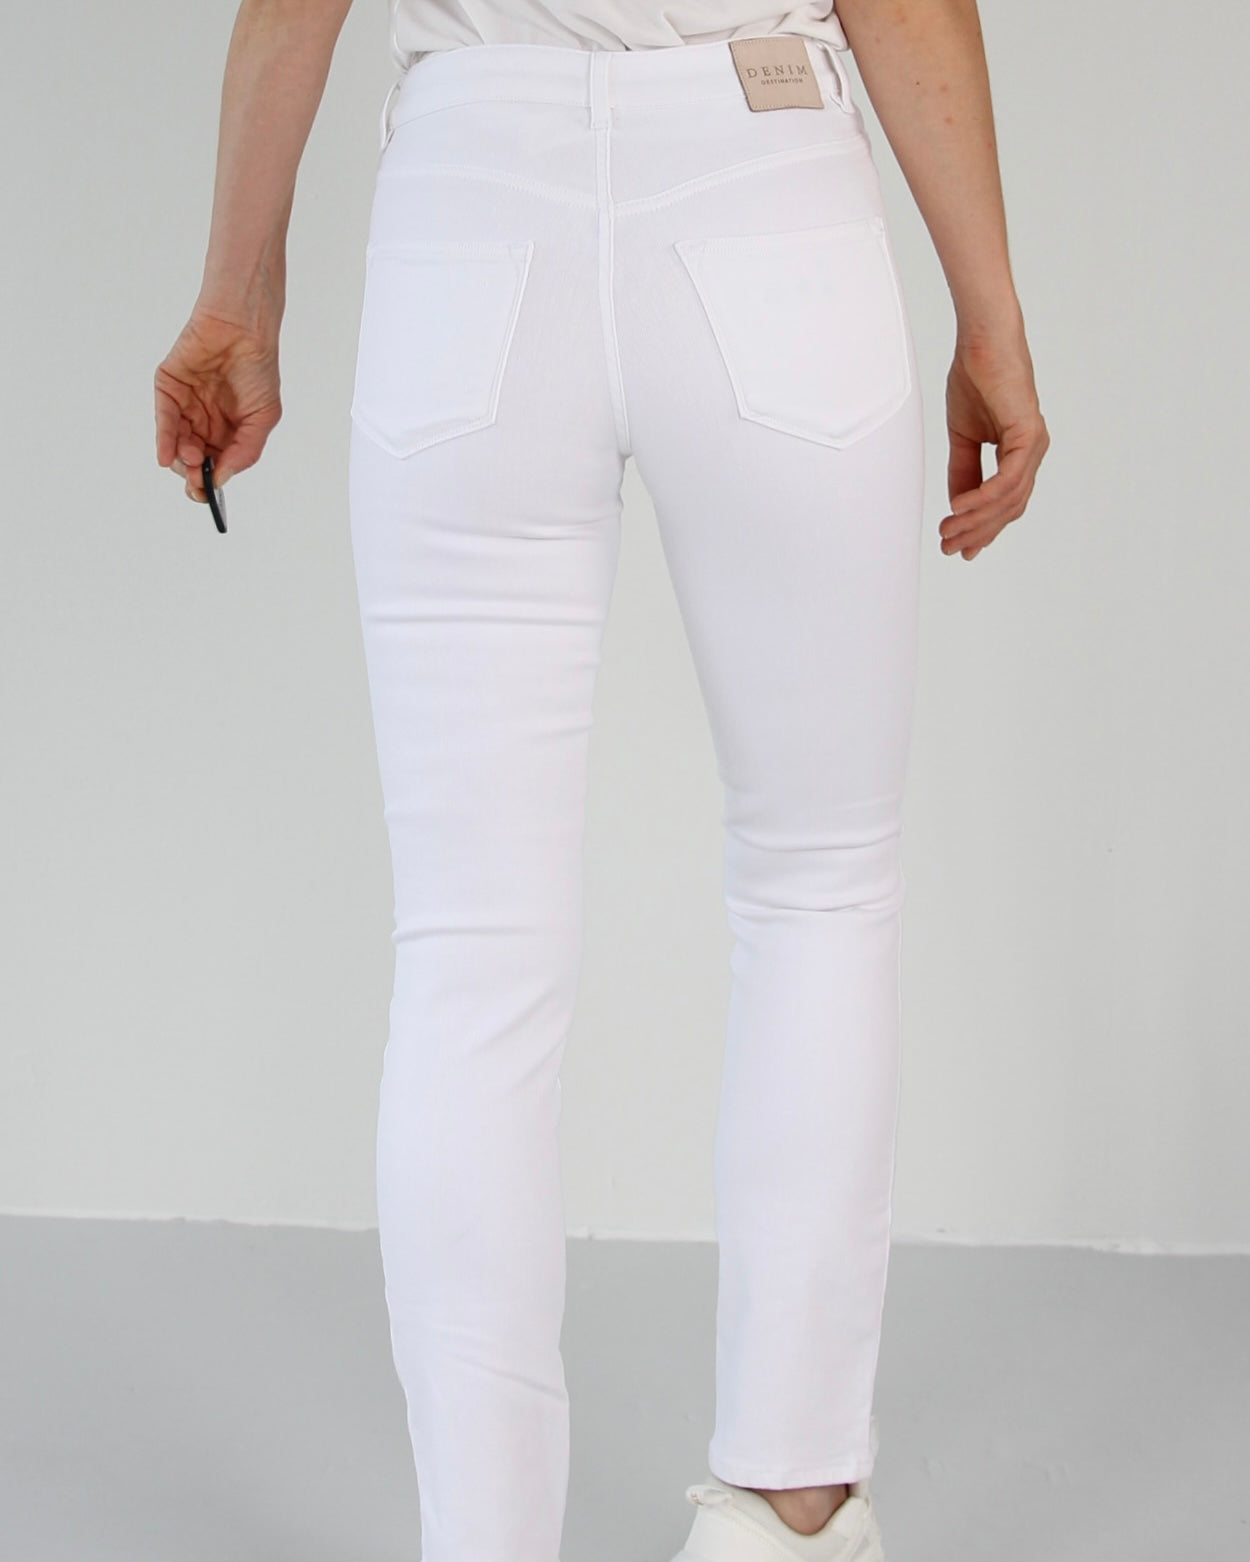 Ellery White Jeans - Dame - Tailored  - High waist - Stretchy